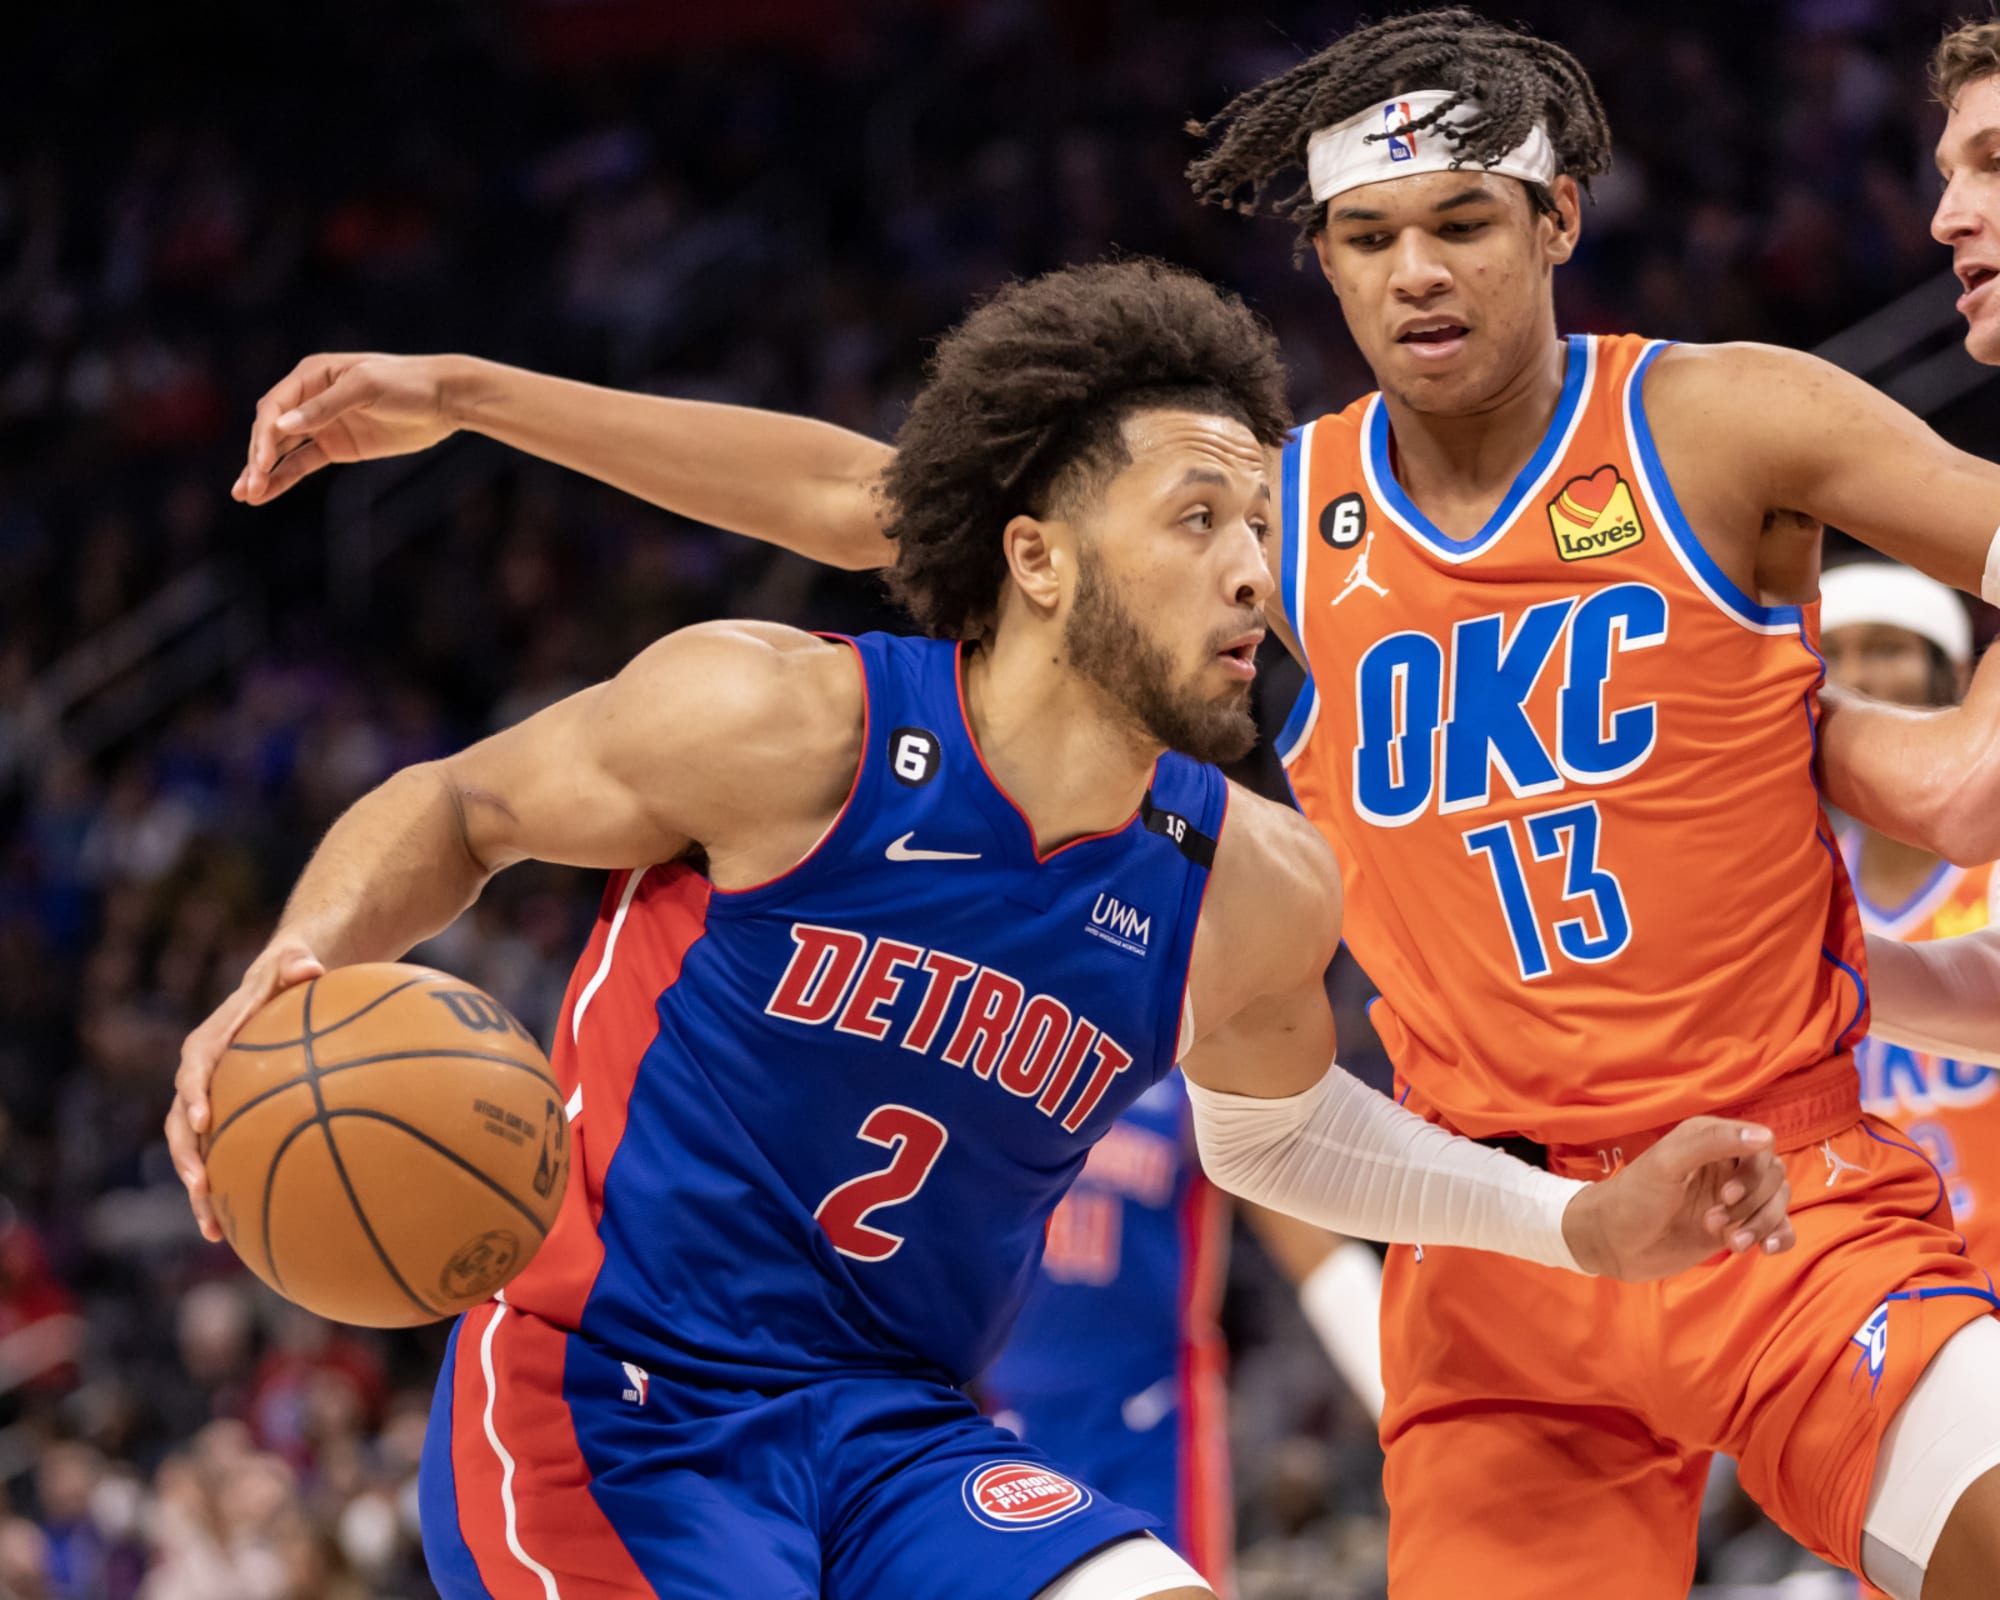 Is Marvin Bagley III in for a Breakout Season for the Pistons?